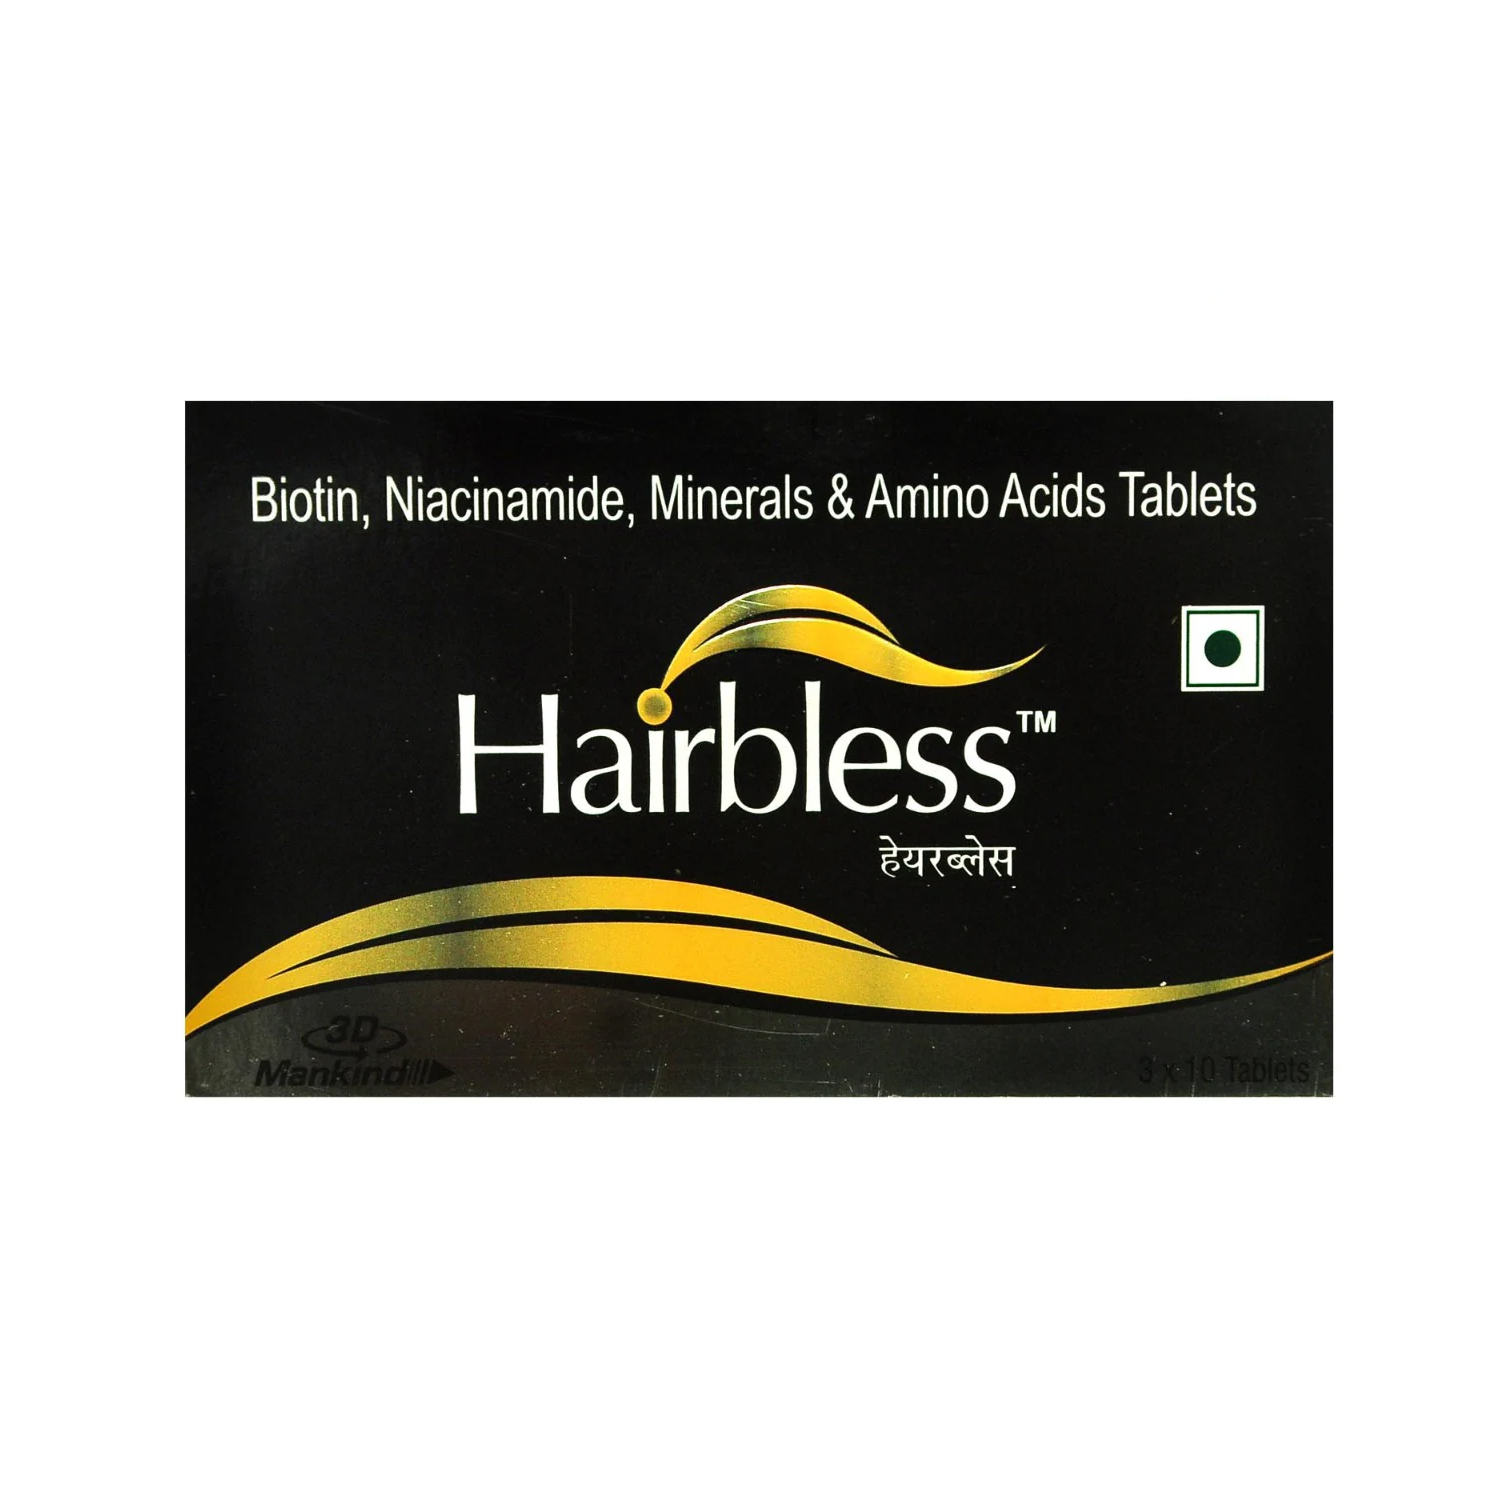 3D Mankind Hairbless Tablet For Improve Hair Growth